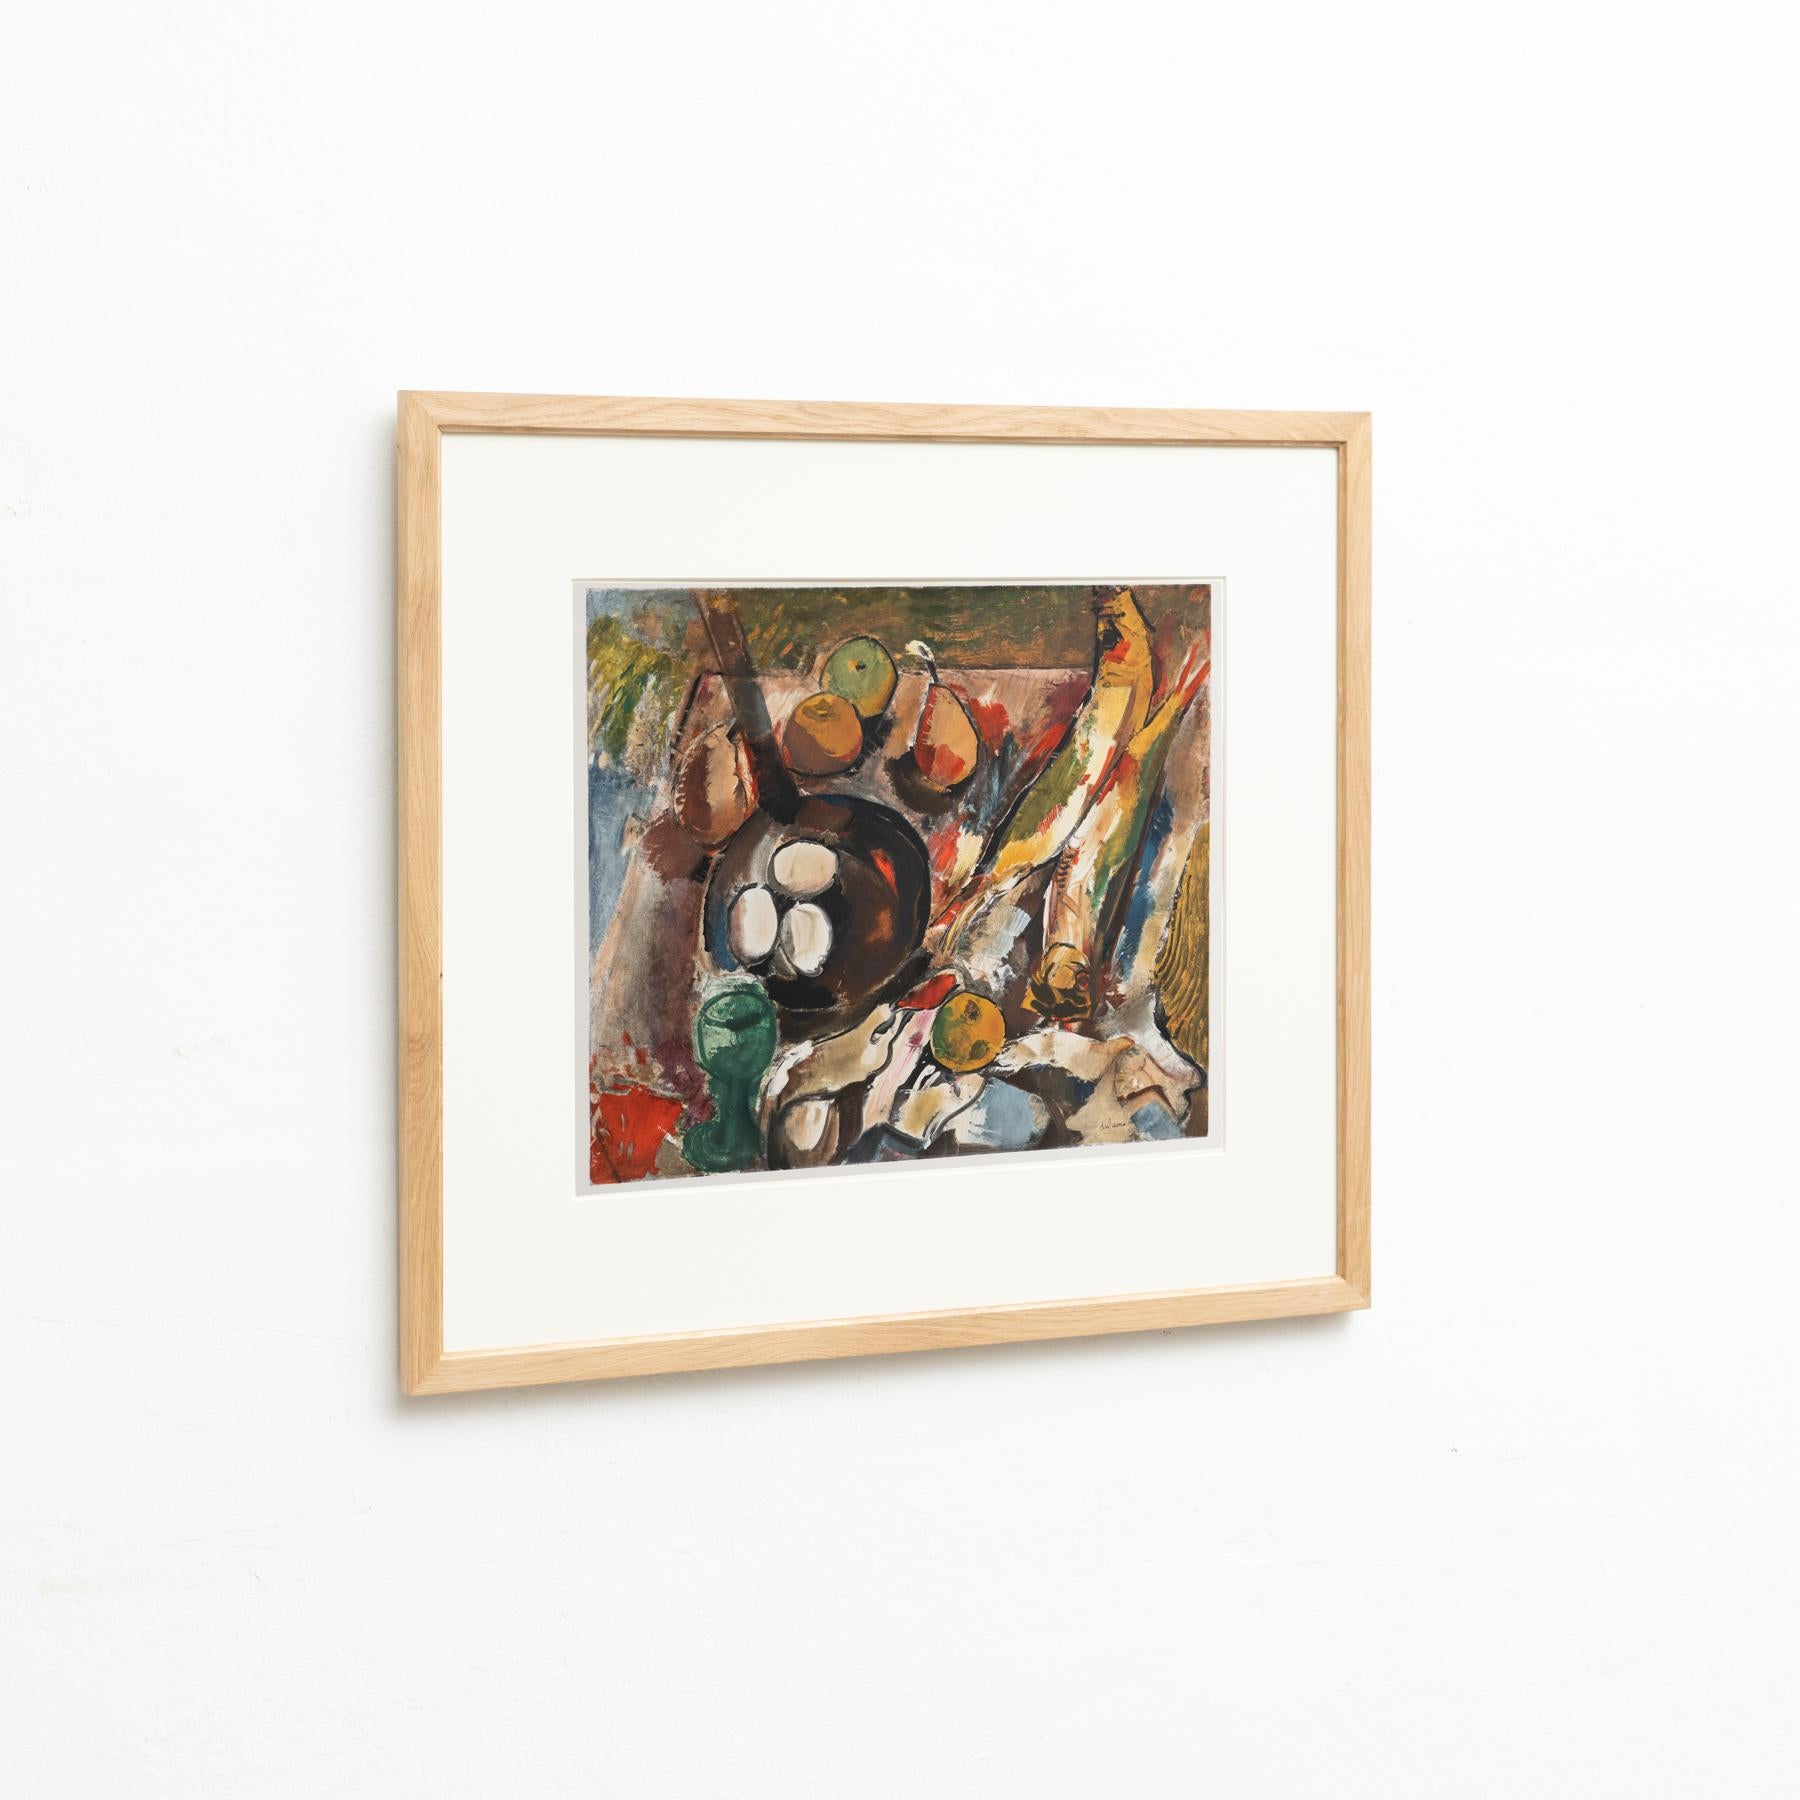 Modern Charles Dufresne Framed 'Nature Morte' Lithography, circa 1971 For Sale